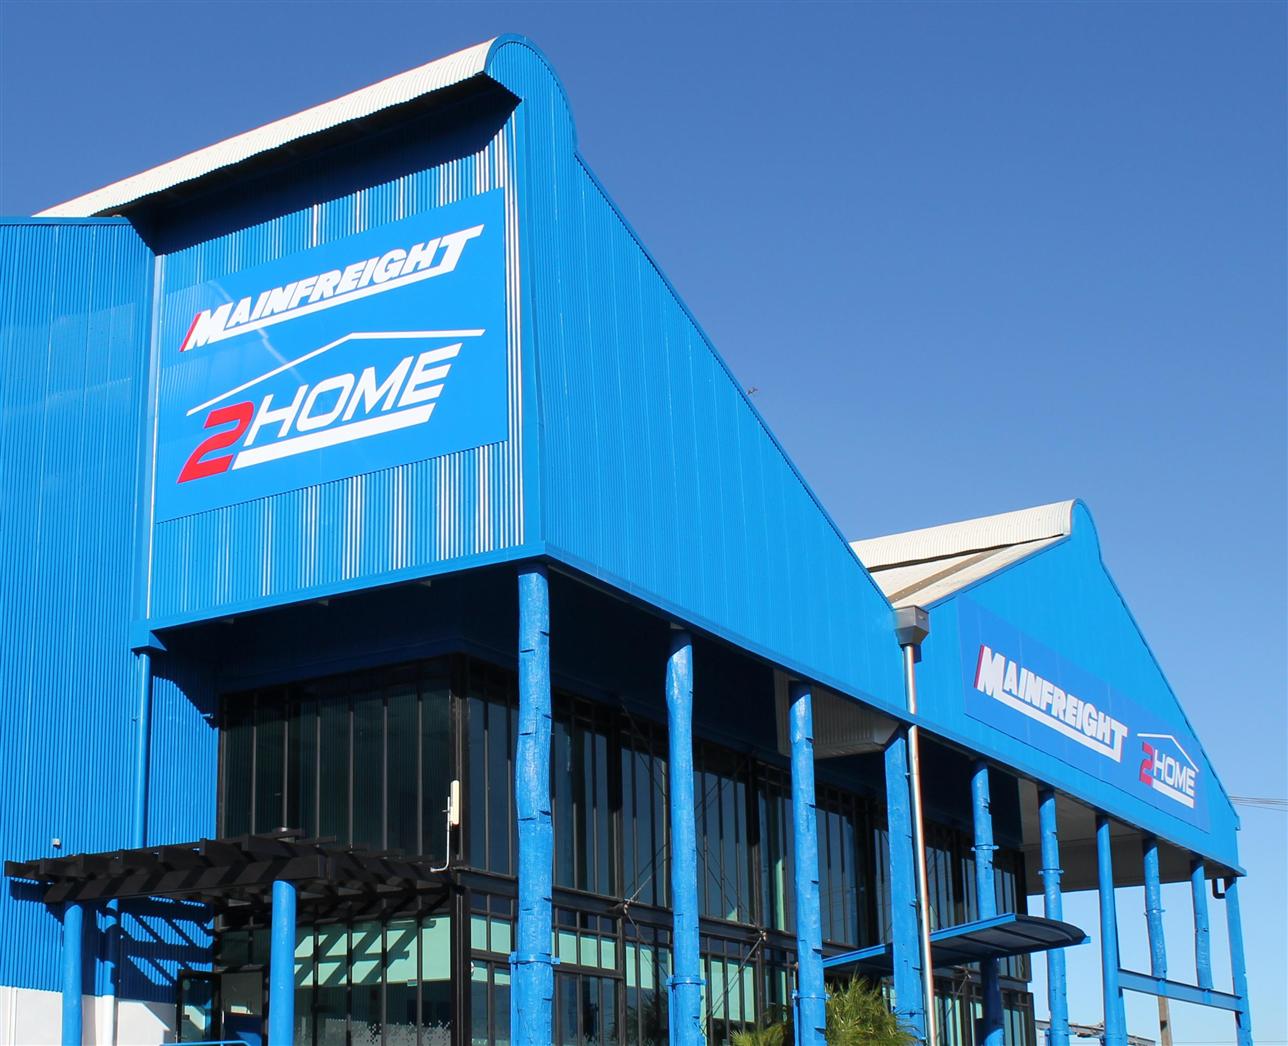 Auckland Mainfreight 2Home your 2 man home delivery experts